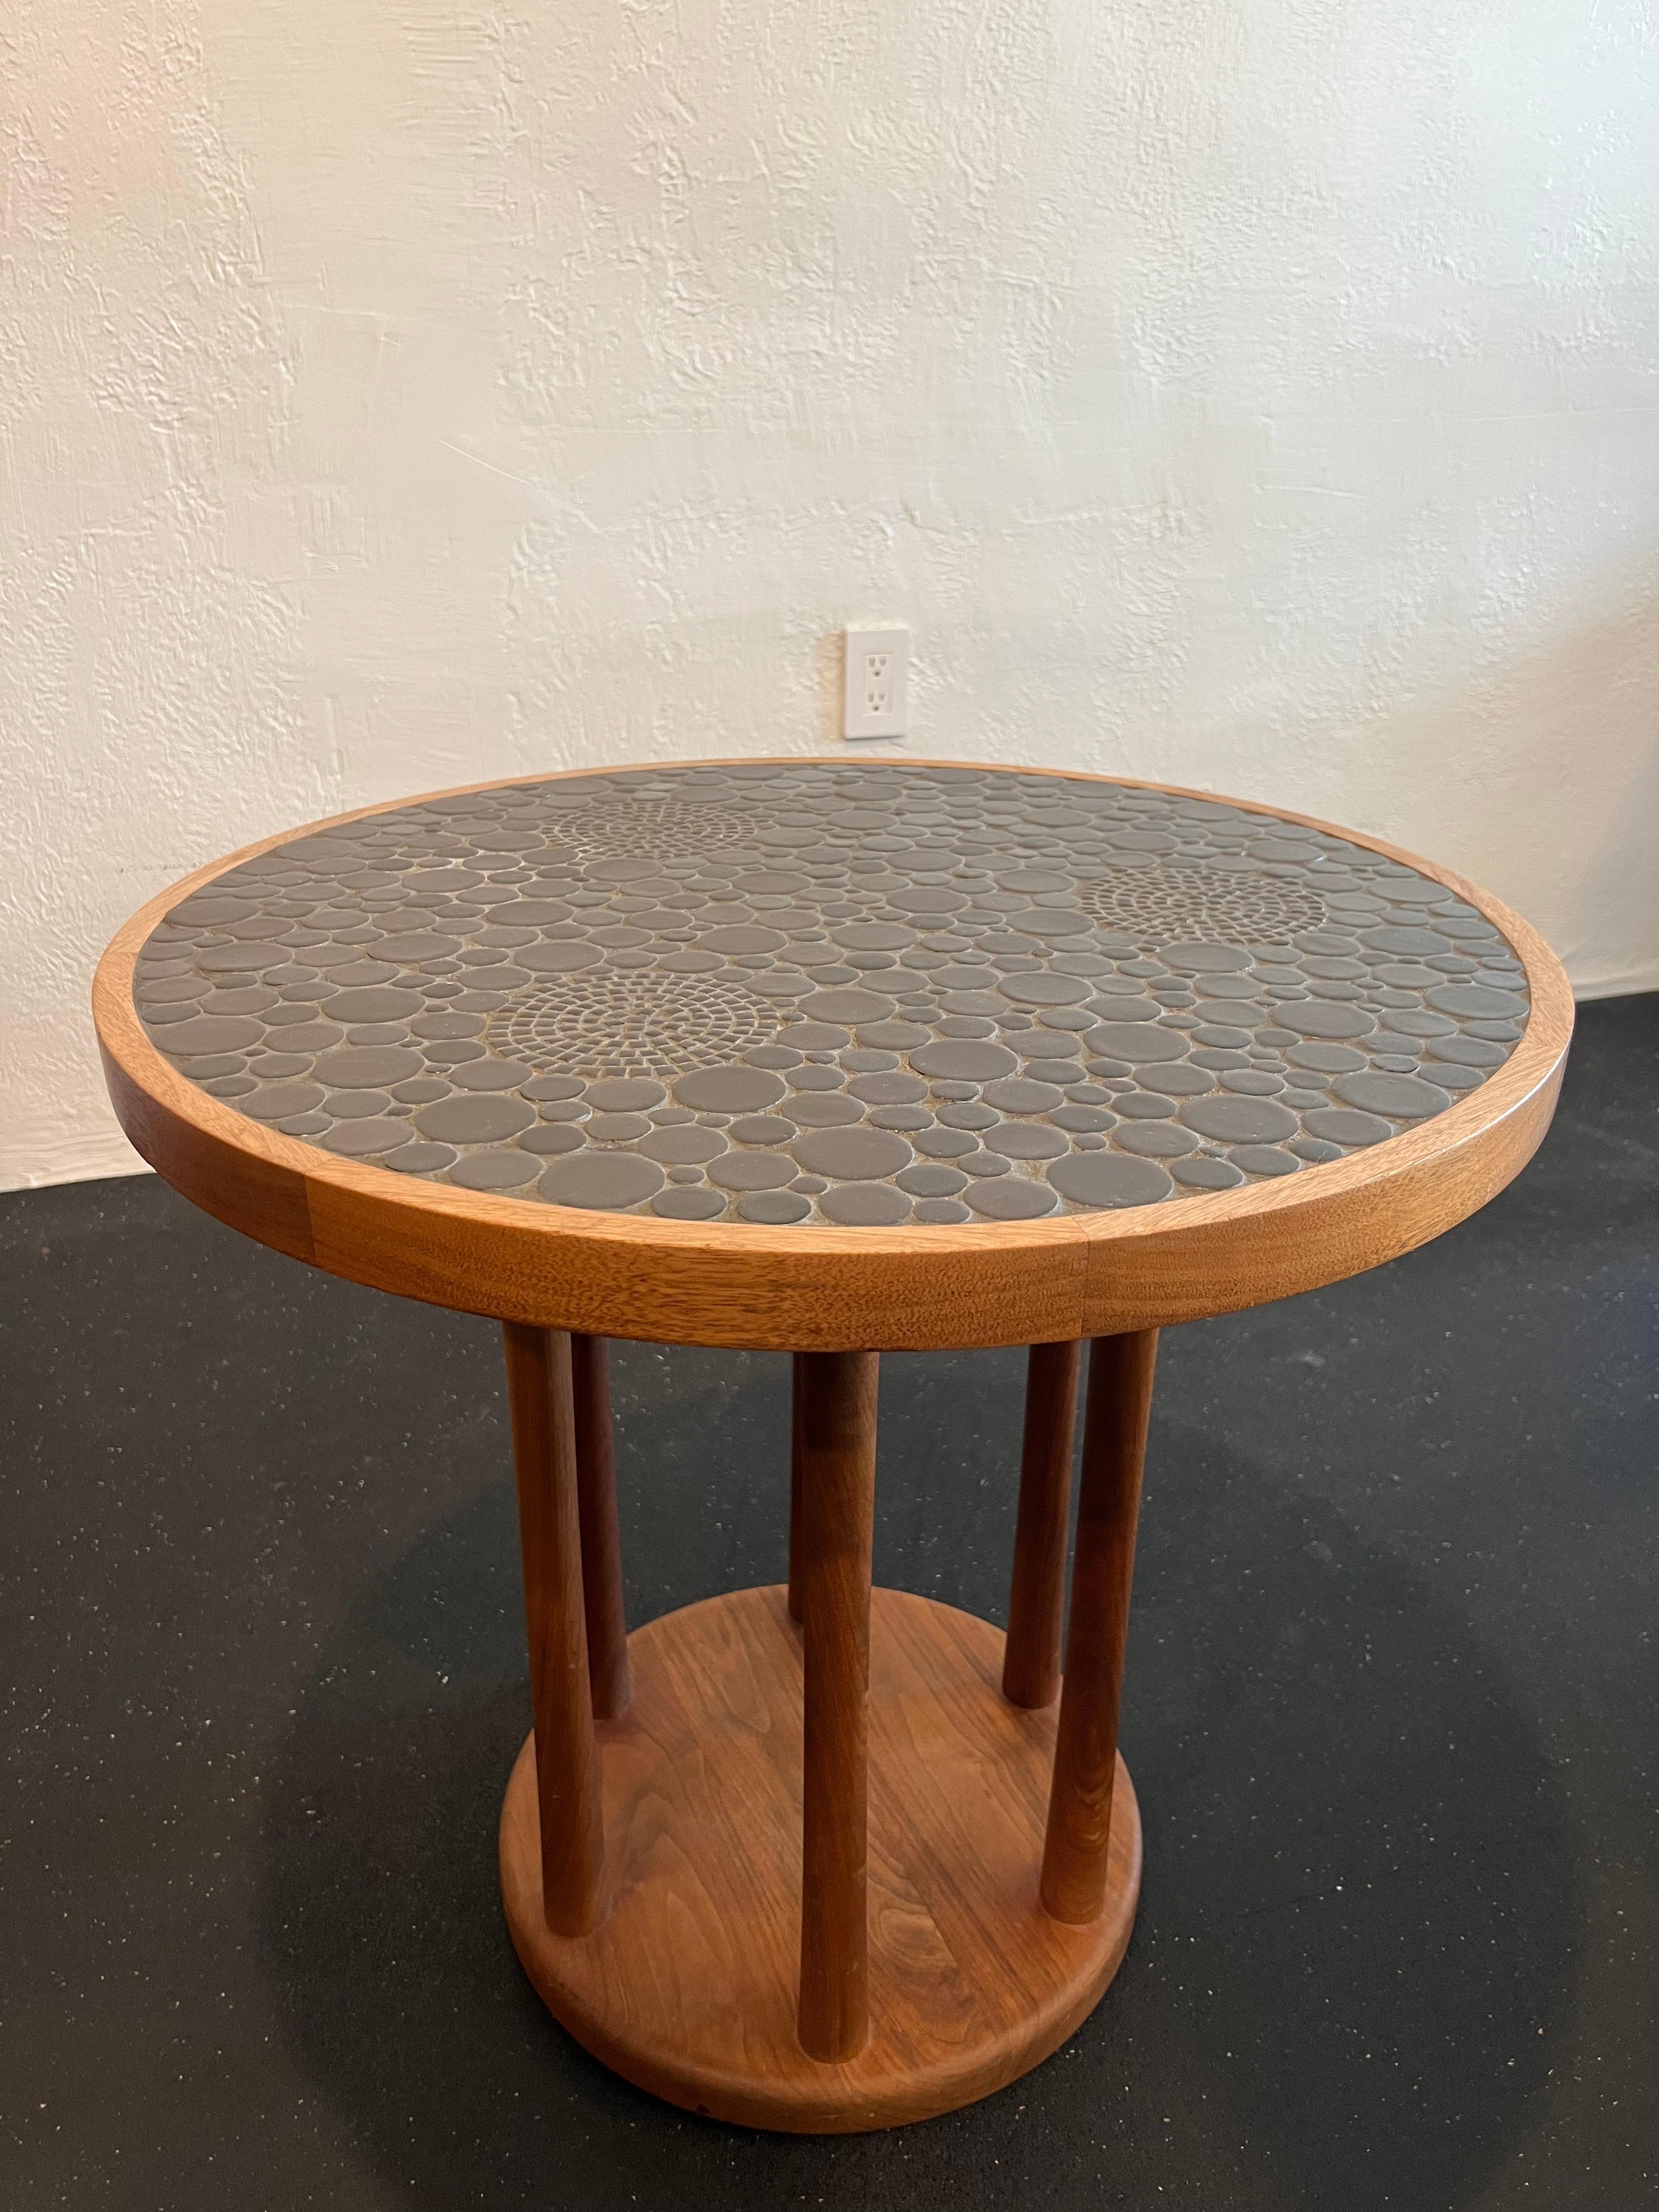 Gordon & Jane Martz coin tile occasional table. Extremely rare example. Matte black ceramic coin tiles on a walnut base.

Would work well in a variety of interiors such as modern, mid century modern, Hollywood regency, etc. Piece blends seamlessly